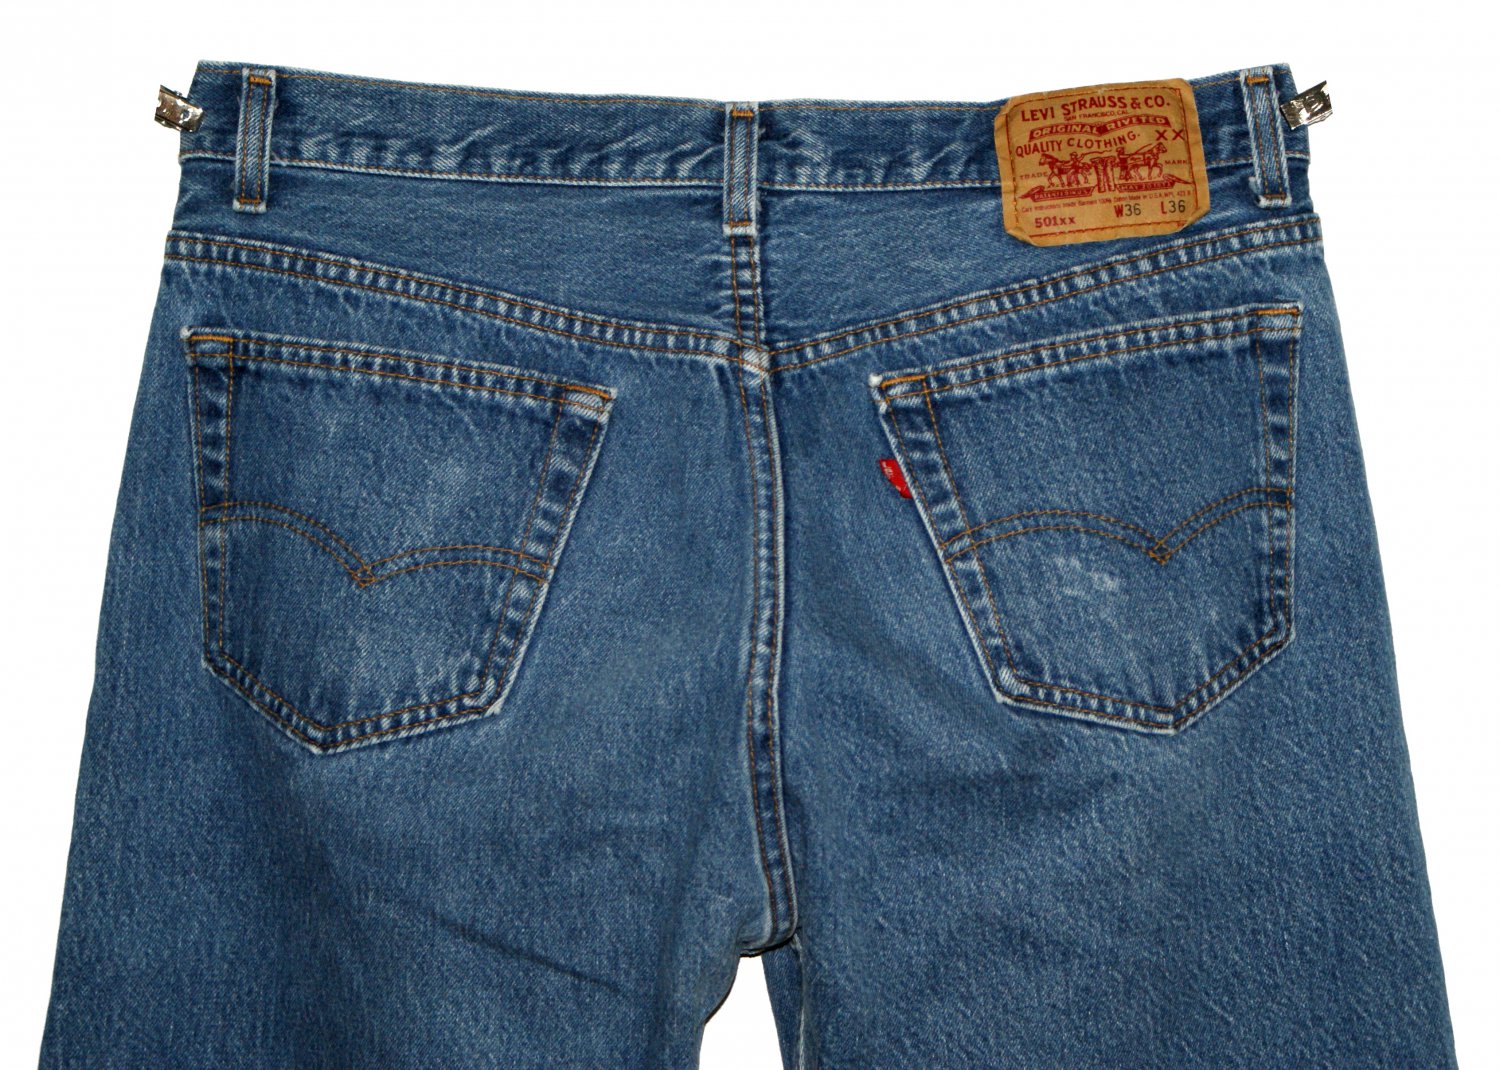 VINTAGE 1992 LEVI'S 501 xx CLASSIC BLUE DENIM JEANS - Made in USA - W36 ...